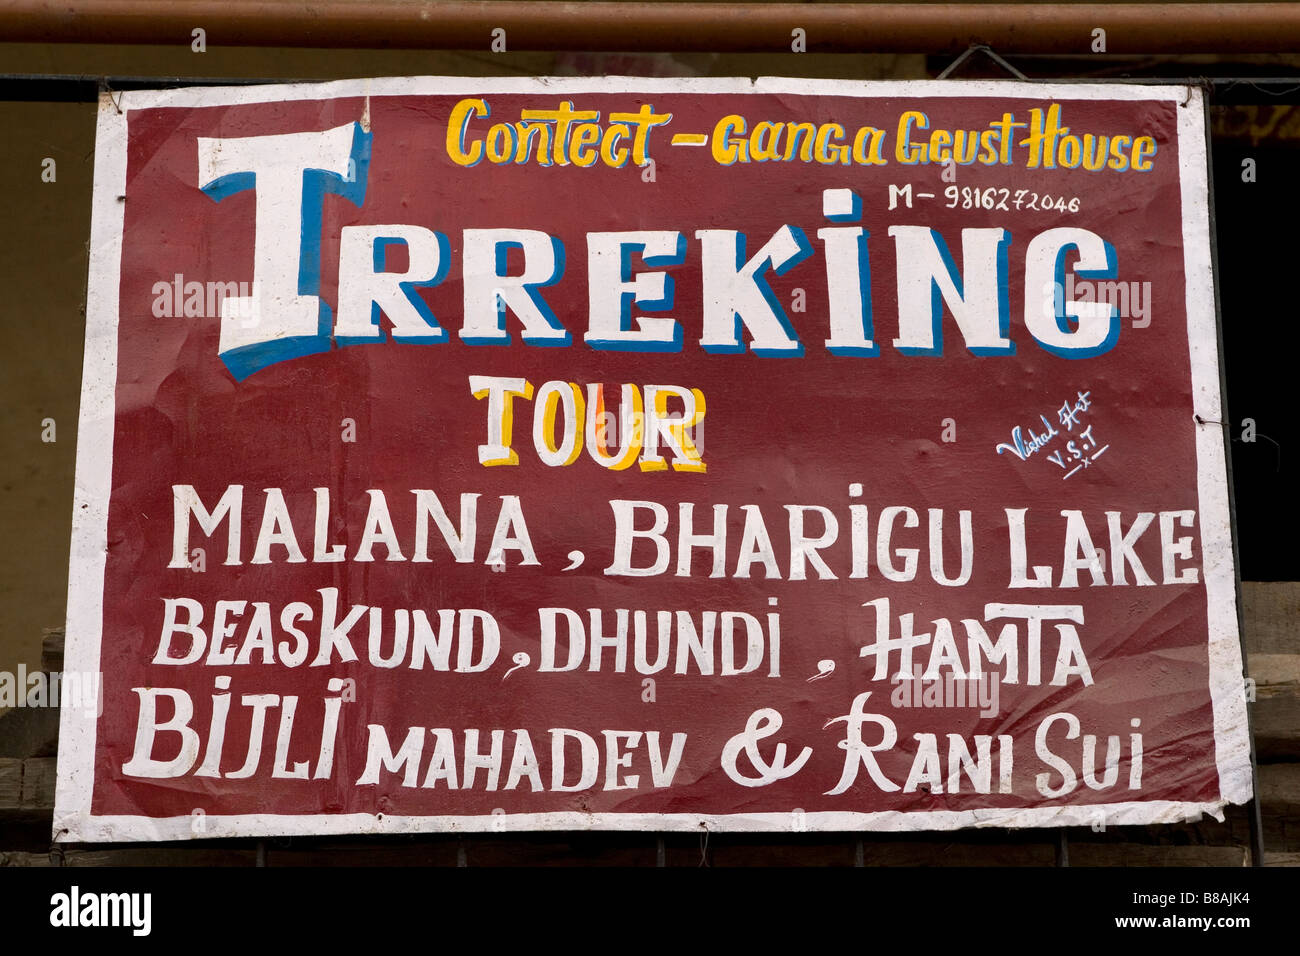 A sign offers a trekking tour in Manali in northern India. The hand painted sign is badly spelled. Stock Photo